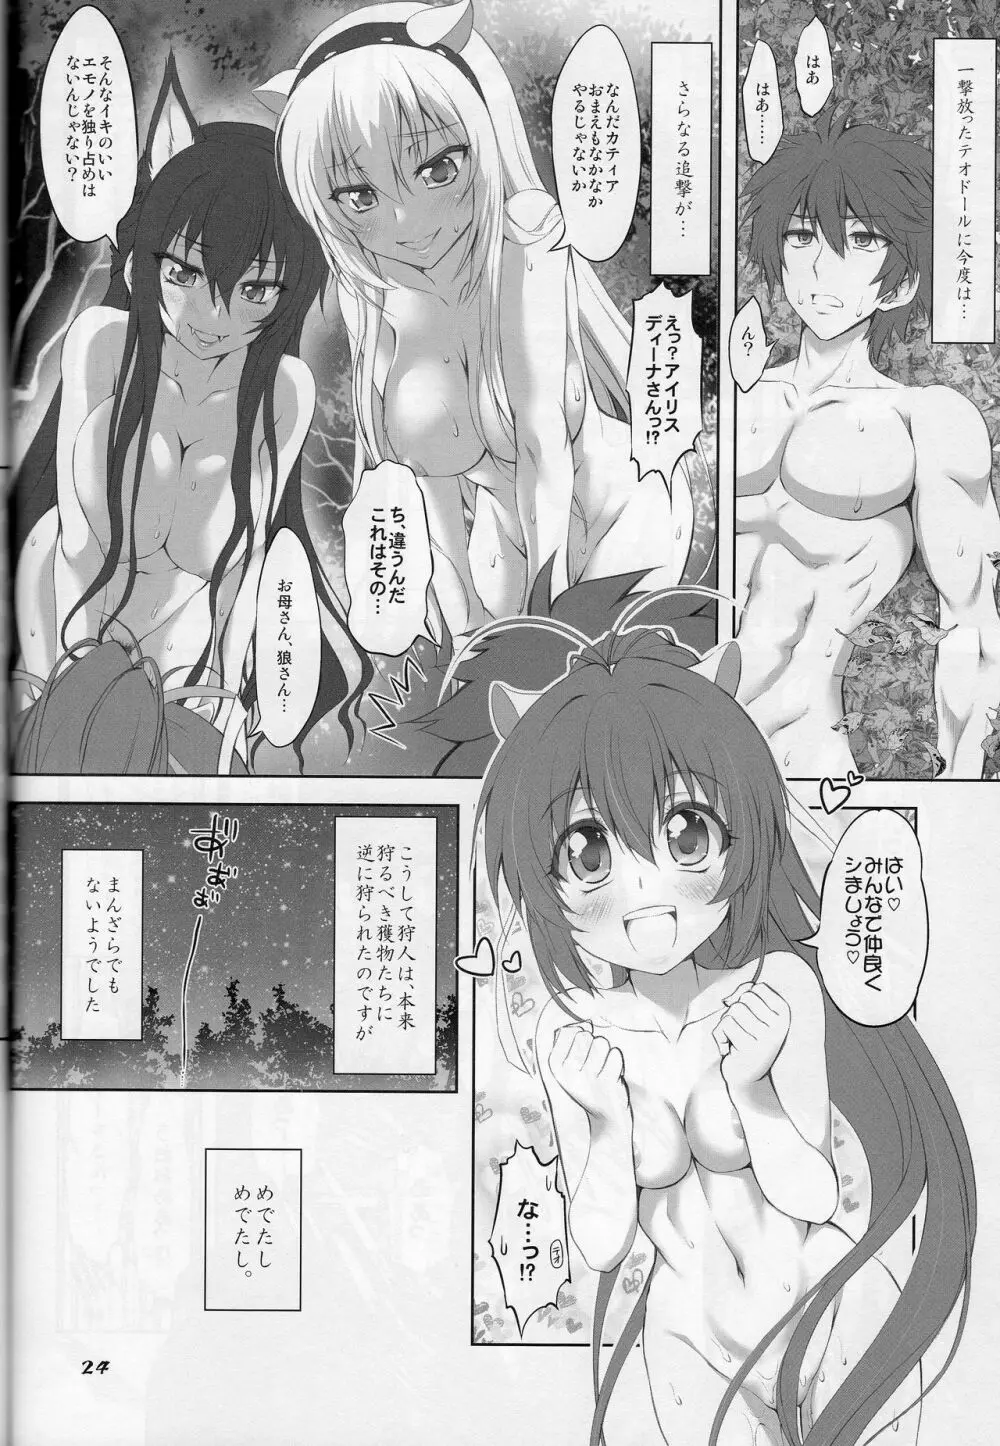 7Girls and wolf Page.25